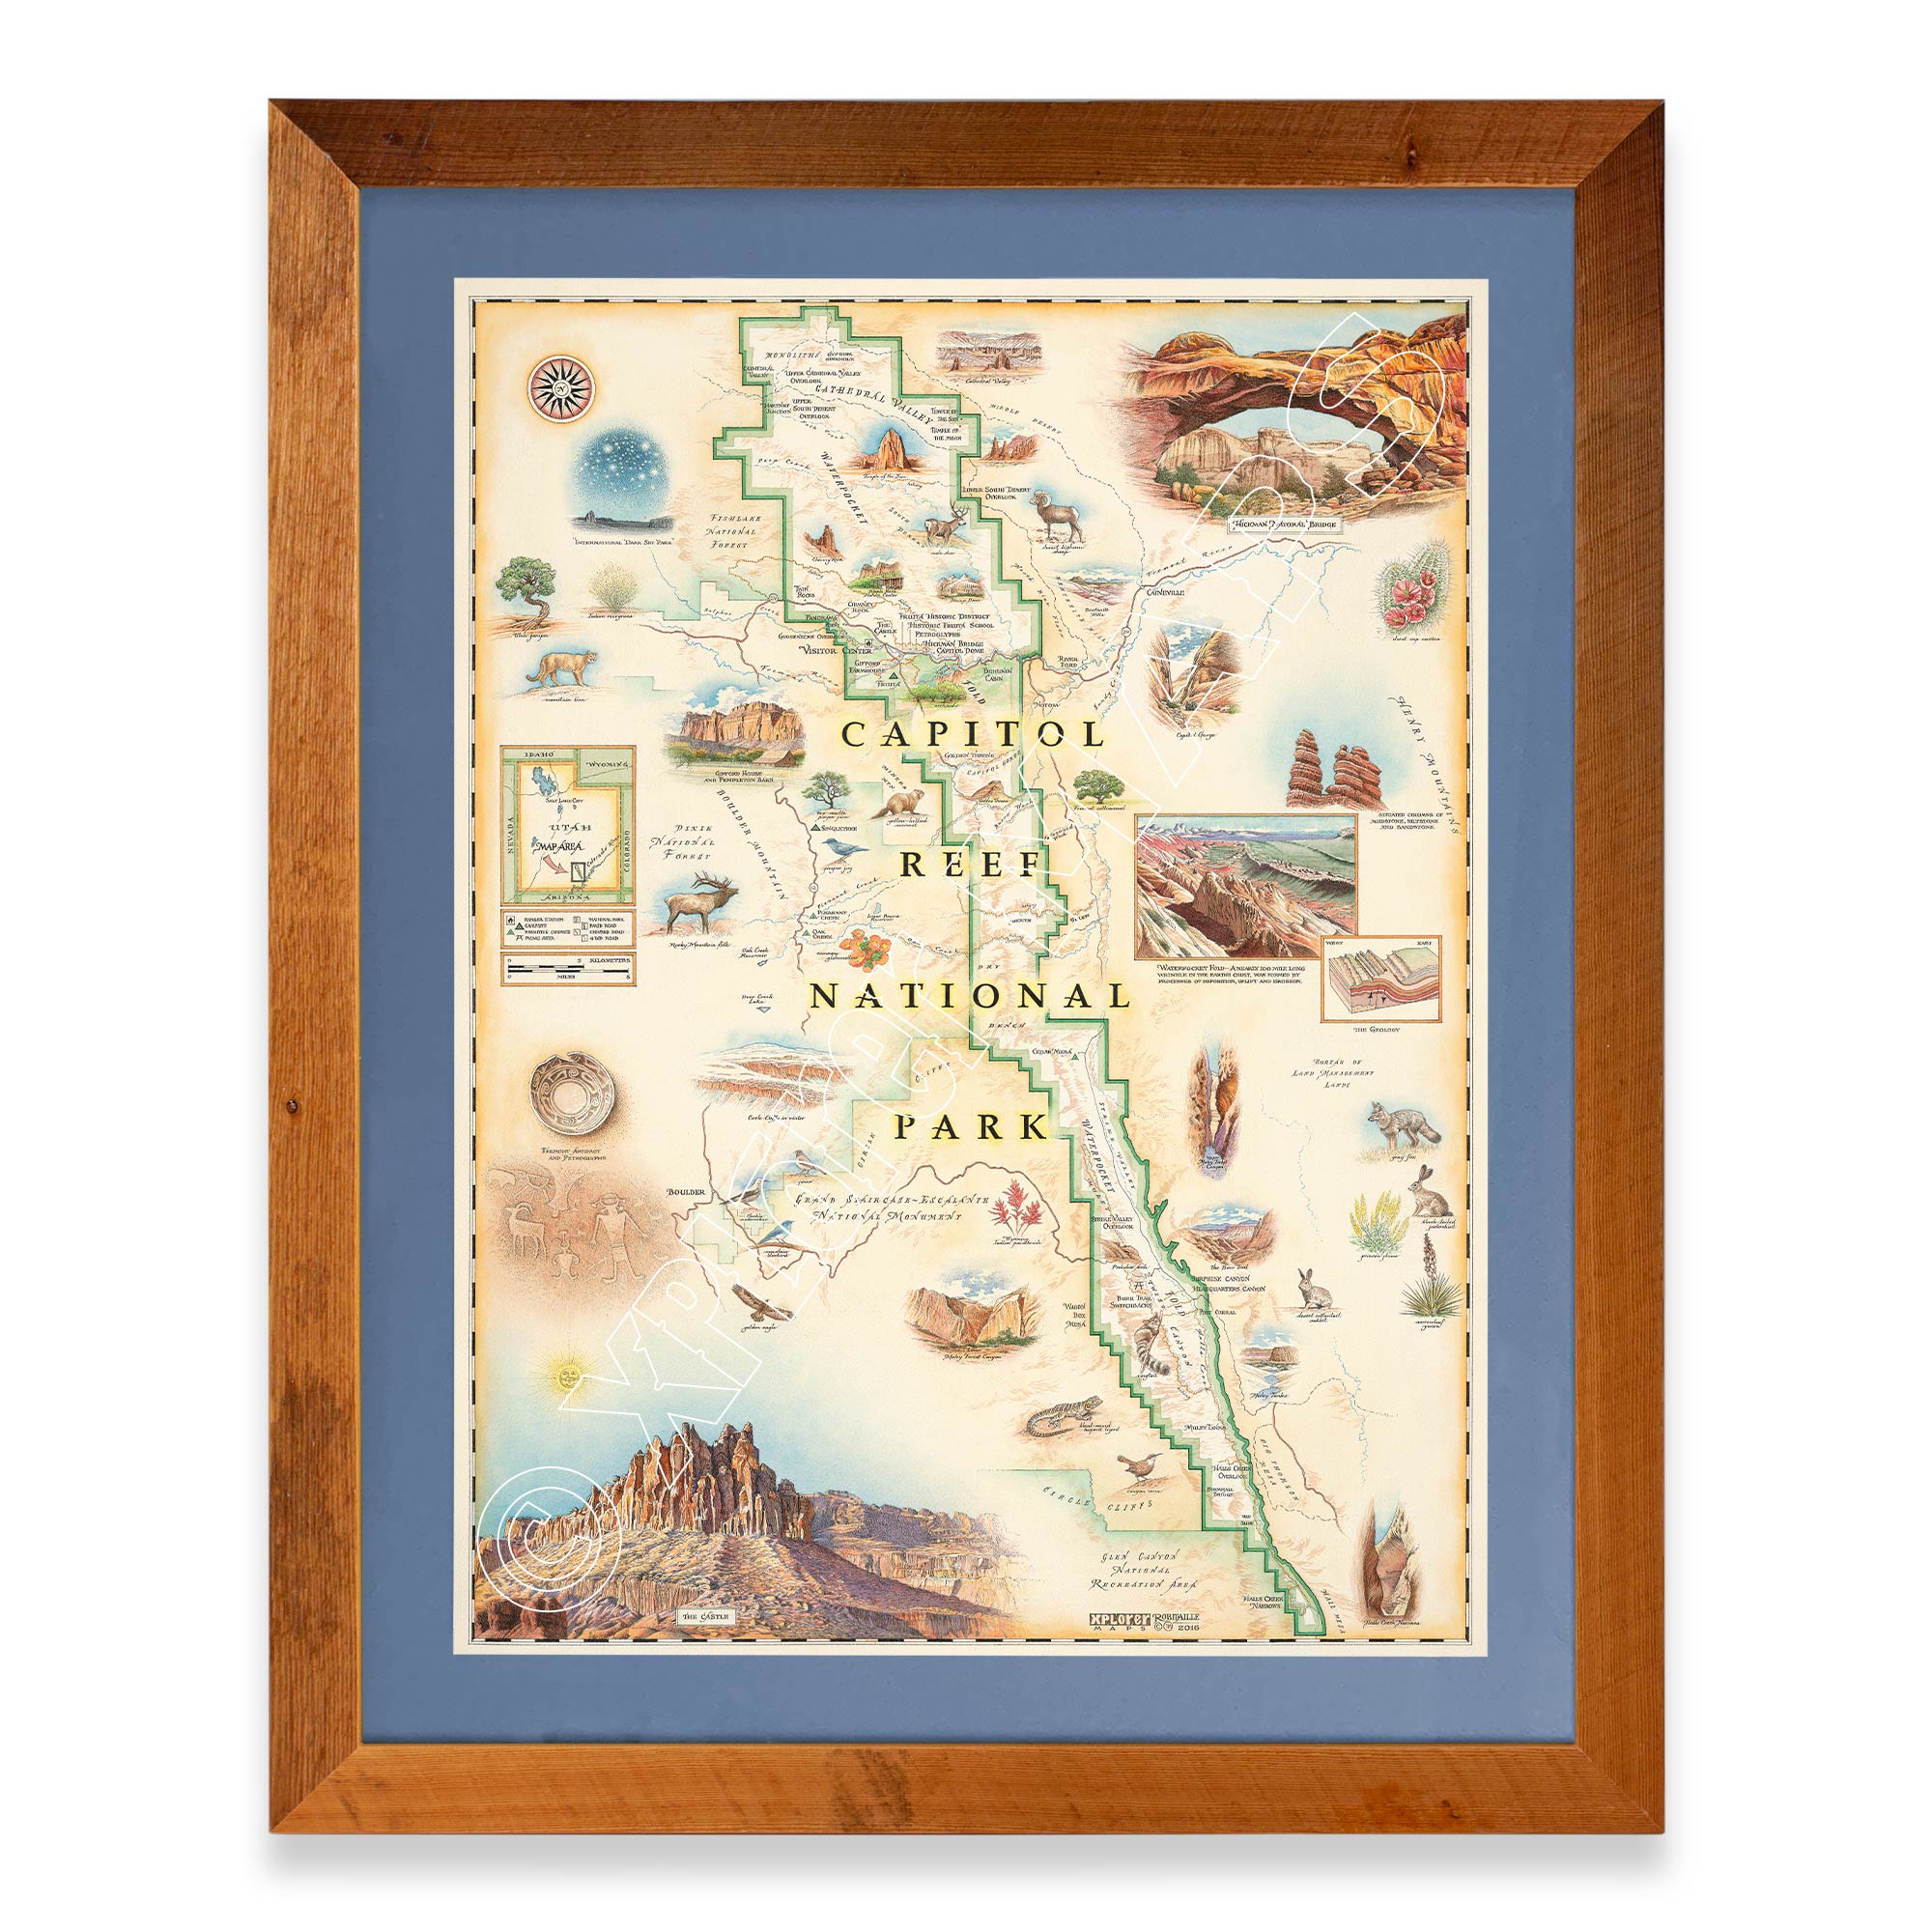 Utah's Capitol Reef National Park hand-drawn map in a Montana Larch wood frame with blue mat. 